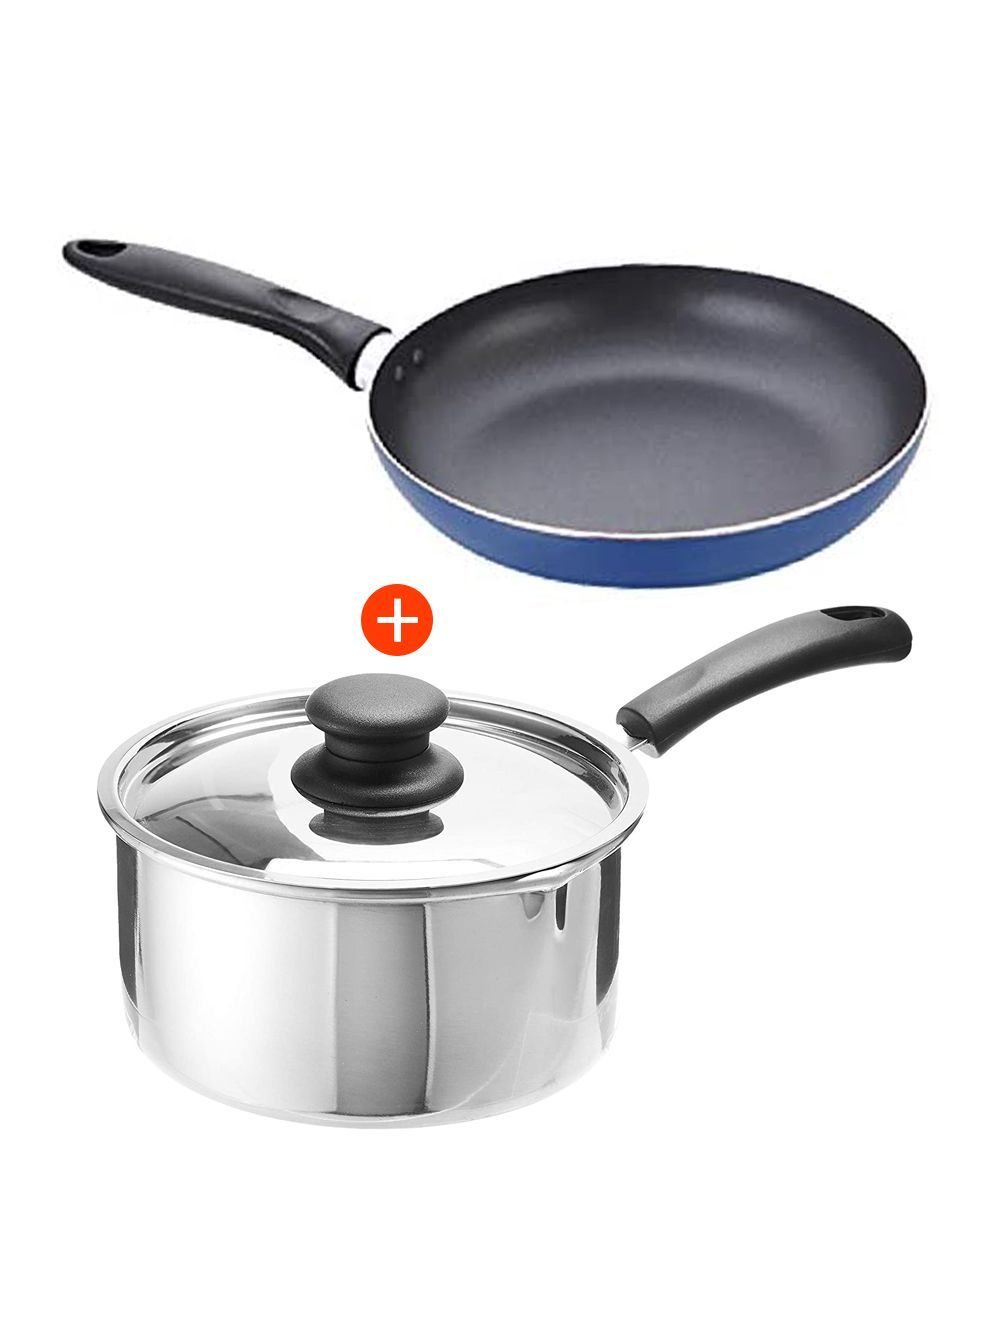 Combo Of Raj Aluminium Sauce Pan With Cover And Non-Stick Induction Frypan-KSP00L+RNF003